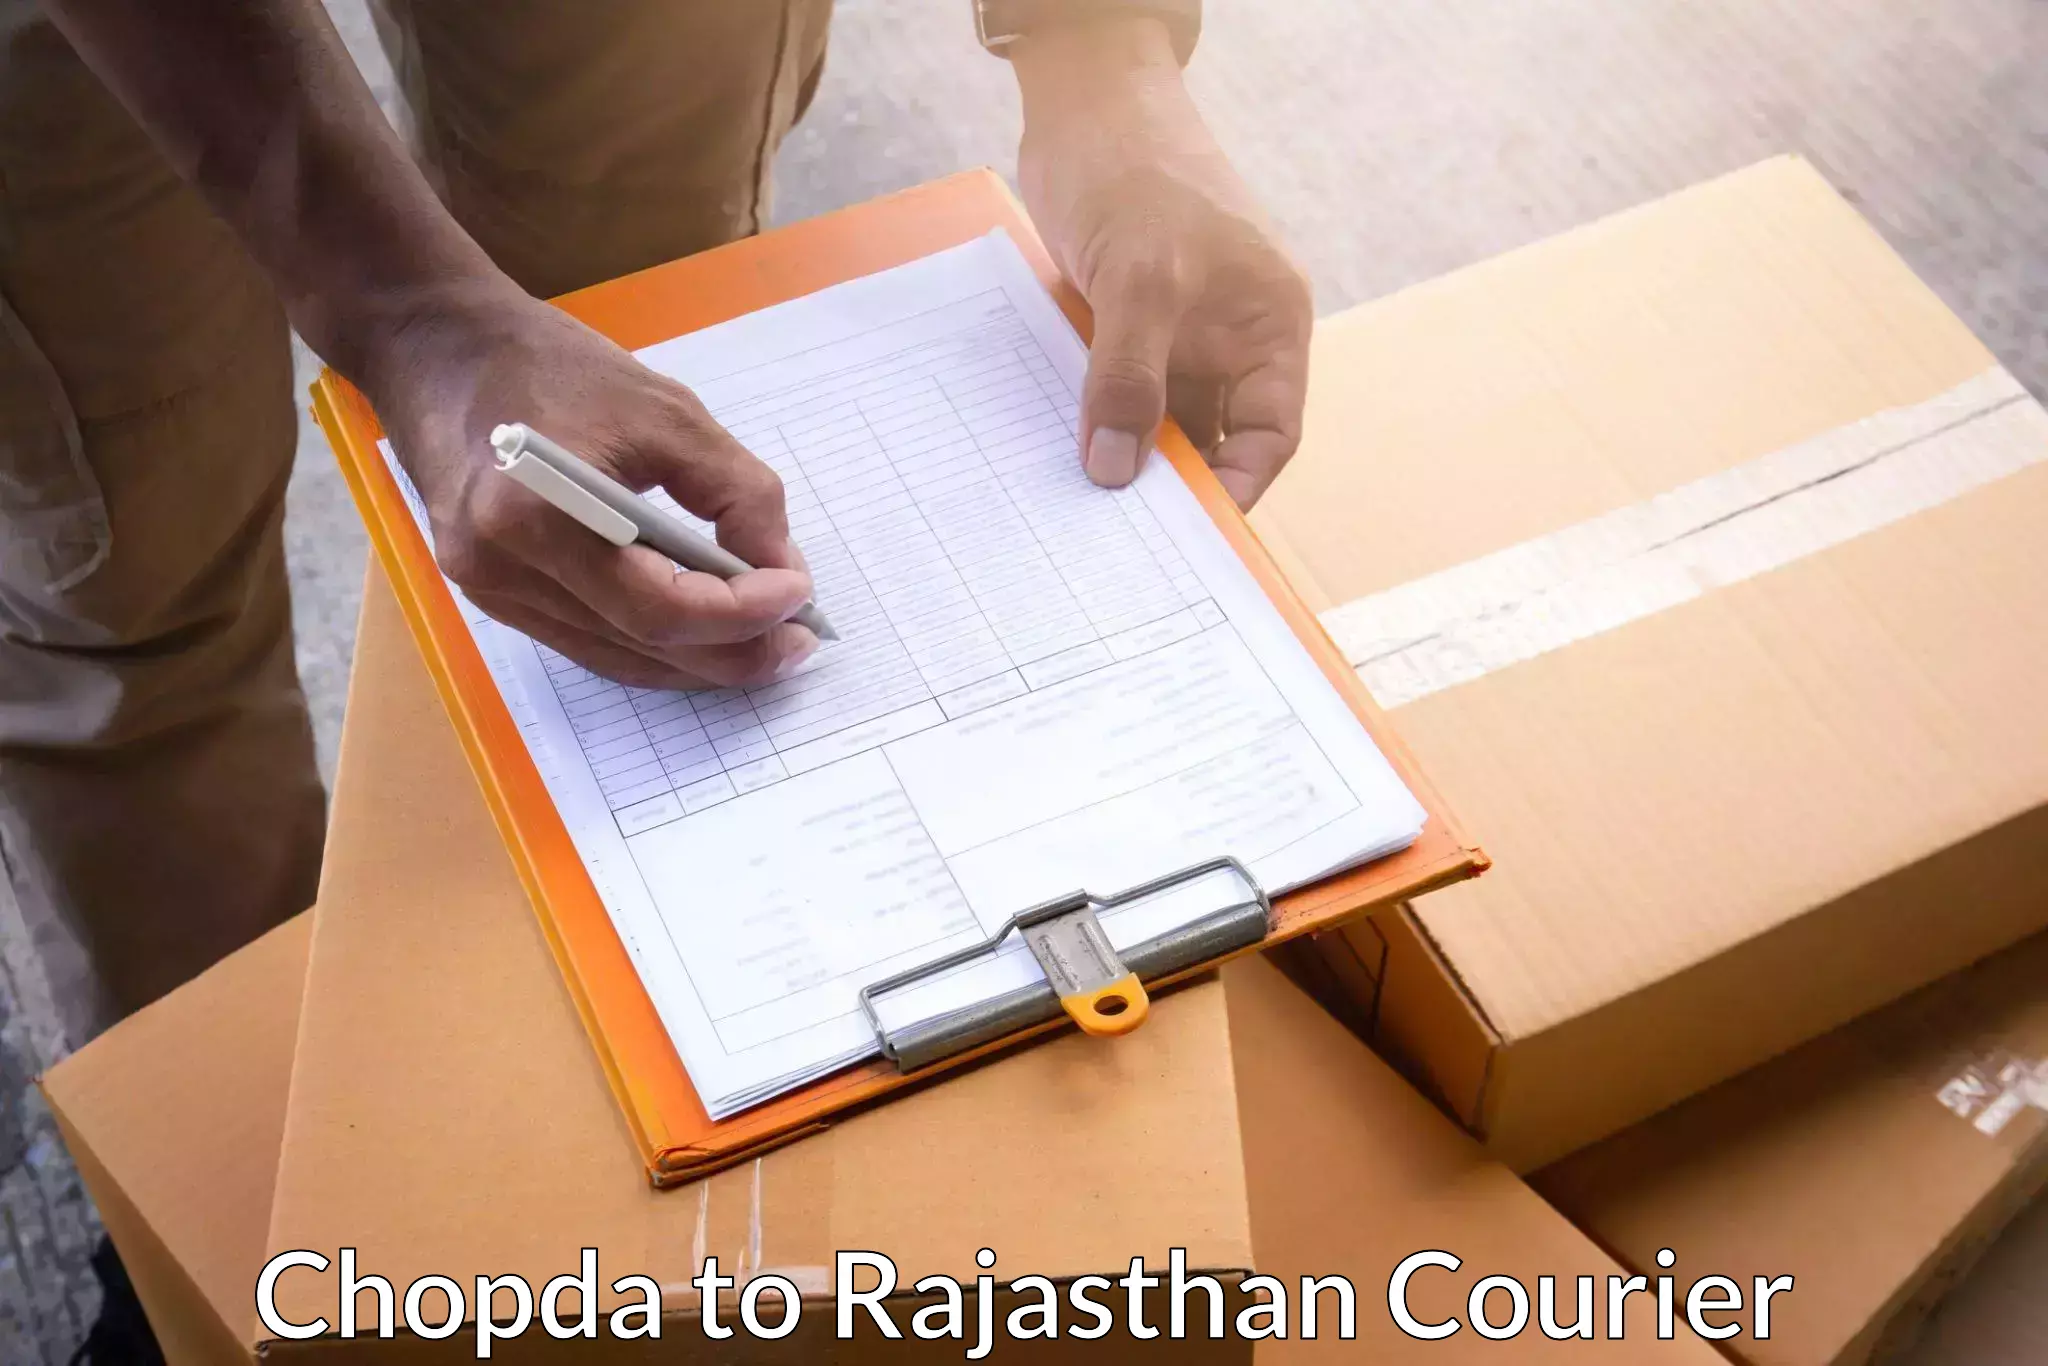 Modern delivery methods Chopda to Dholpur